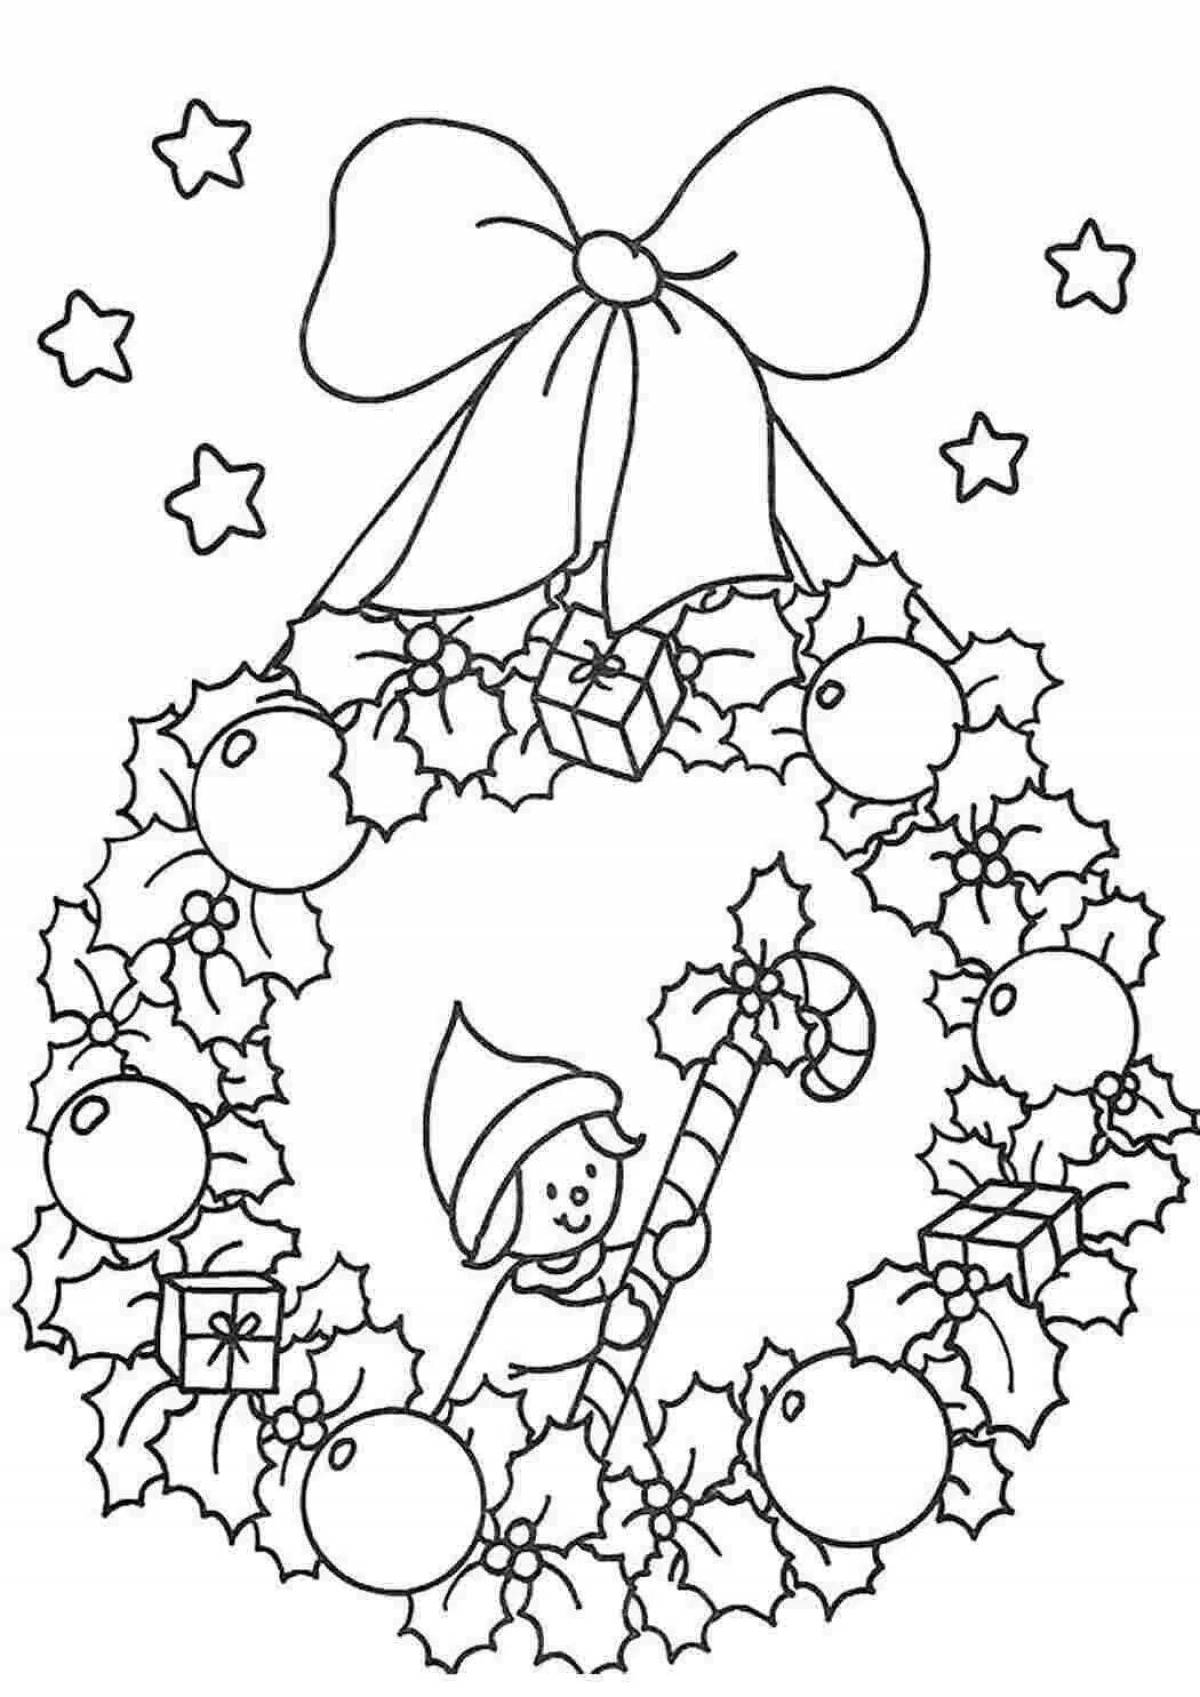 Children's colorful Christmas wreath coloring book